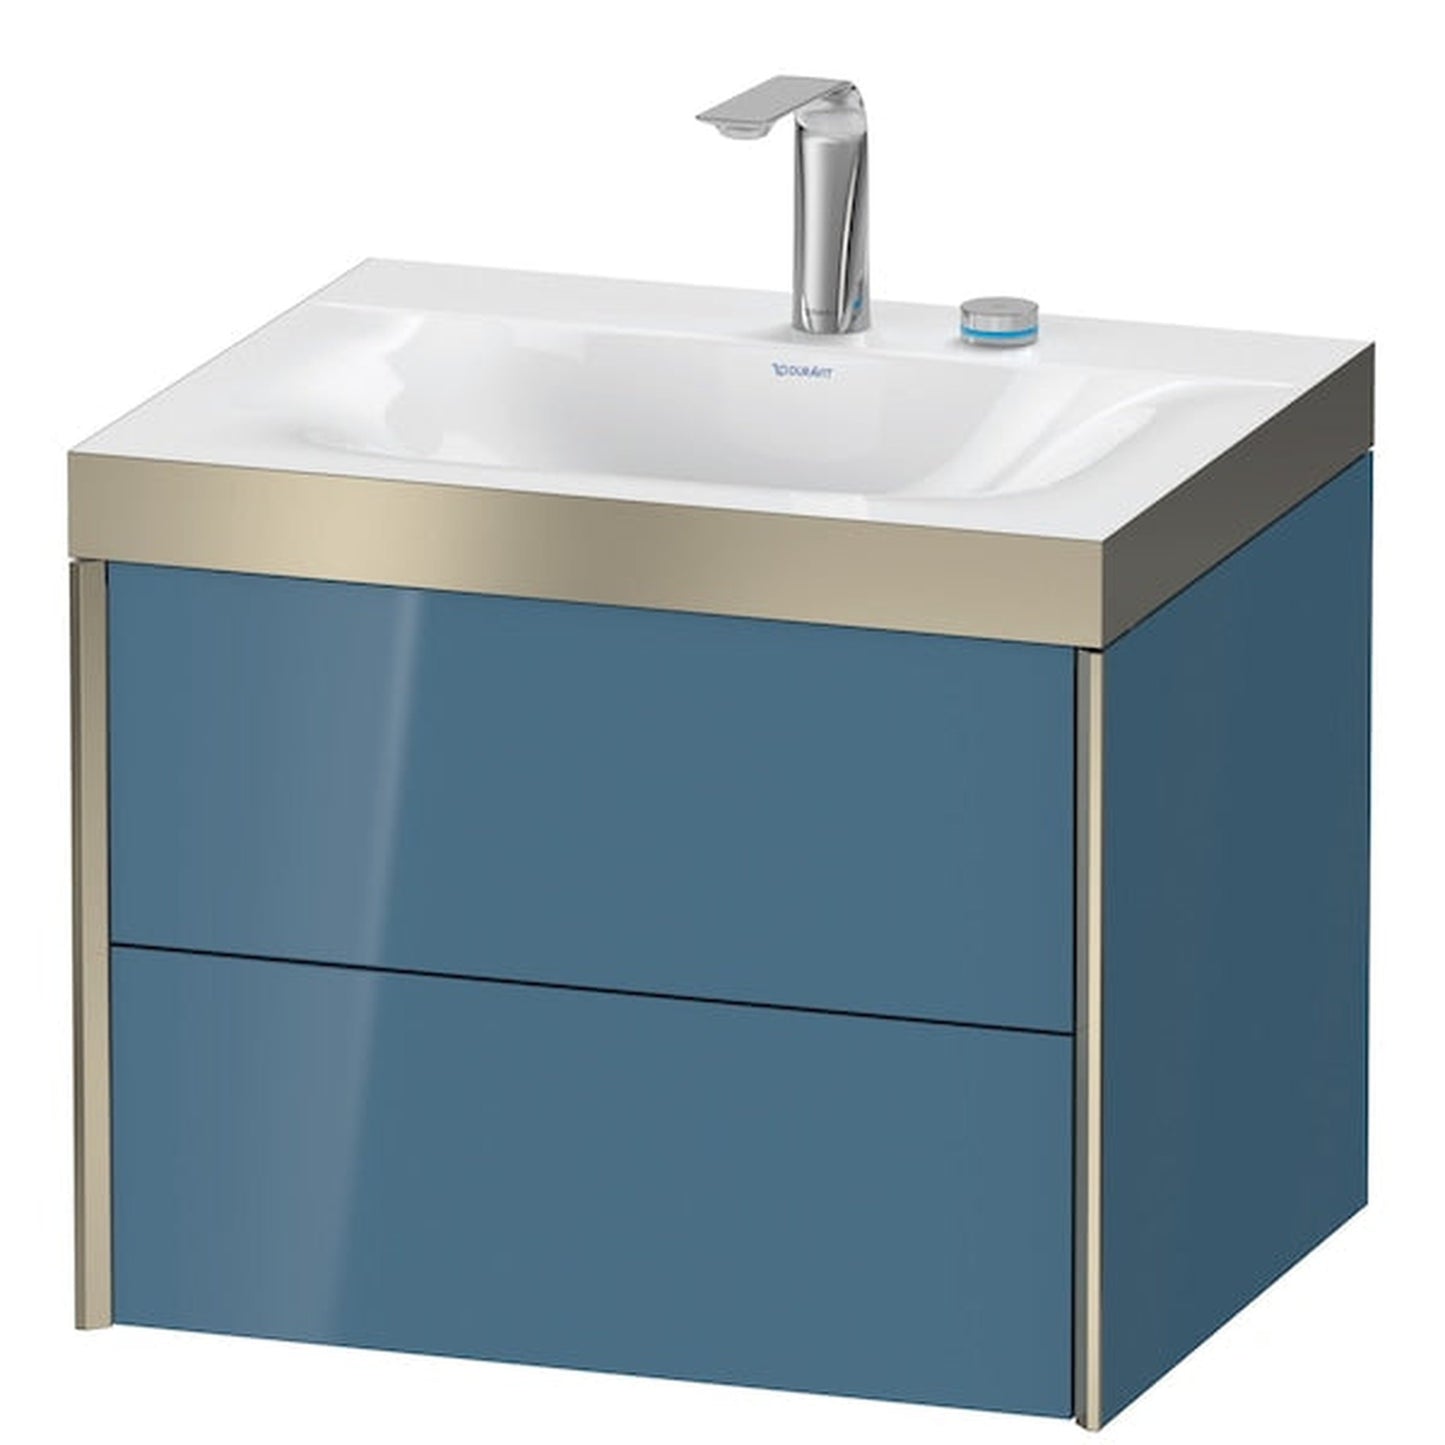 Duravit Xviu 24" x 20" x 19" Two Drawer C-Bonded Wall-Mount Vanity Kit With Two Tap Holes, Stone Blue (XV4614EB147P)